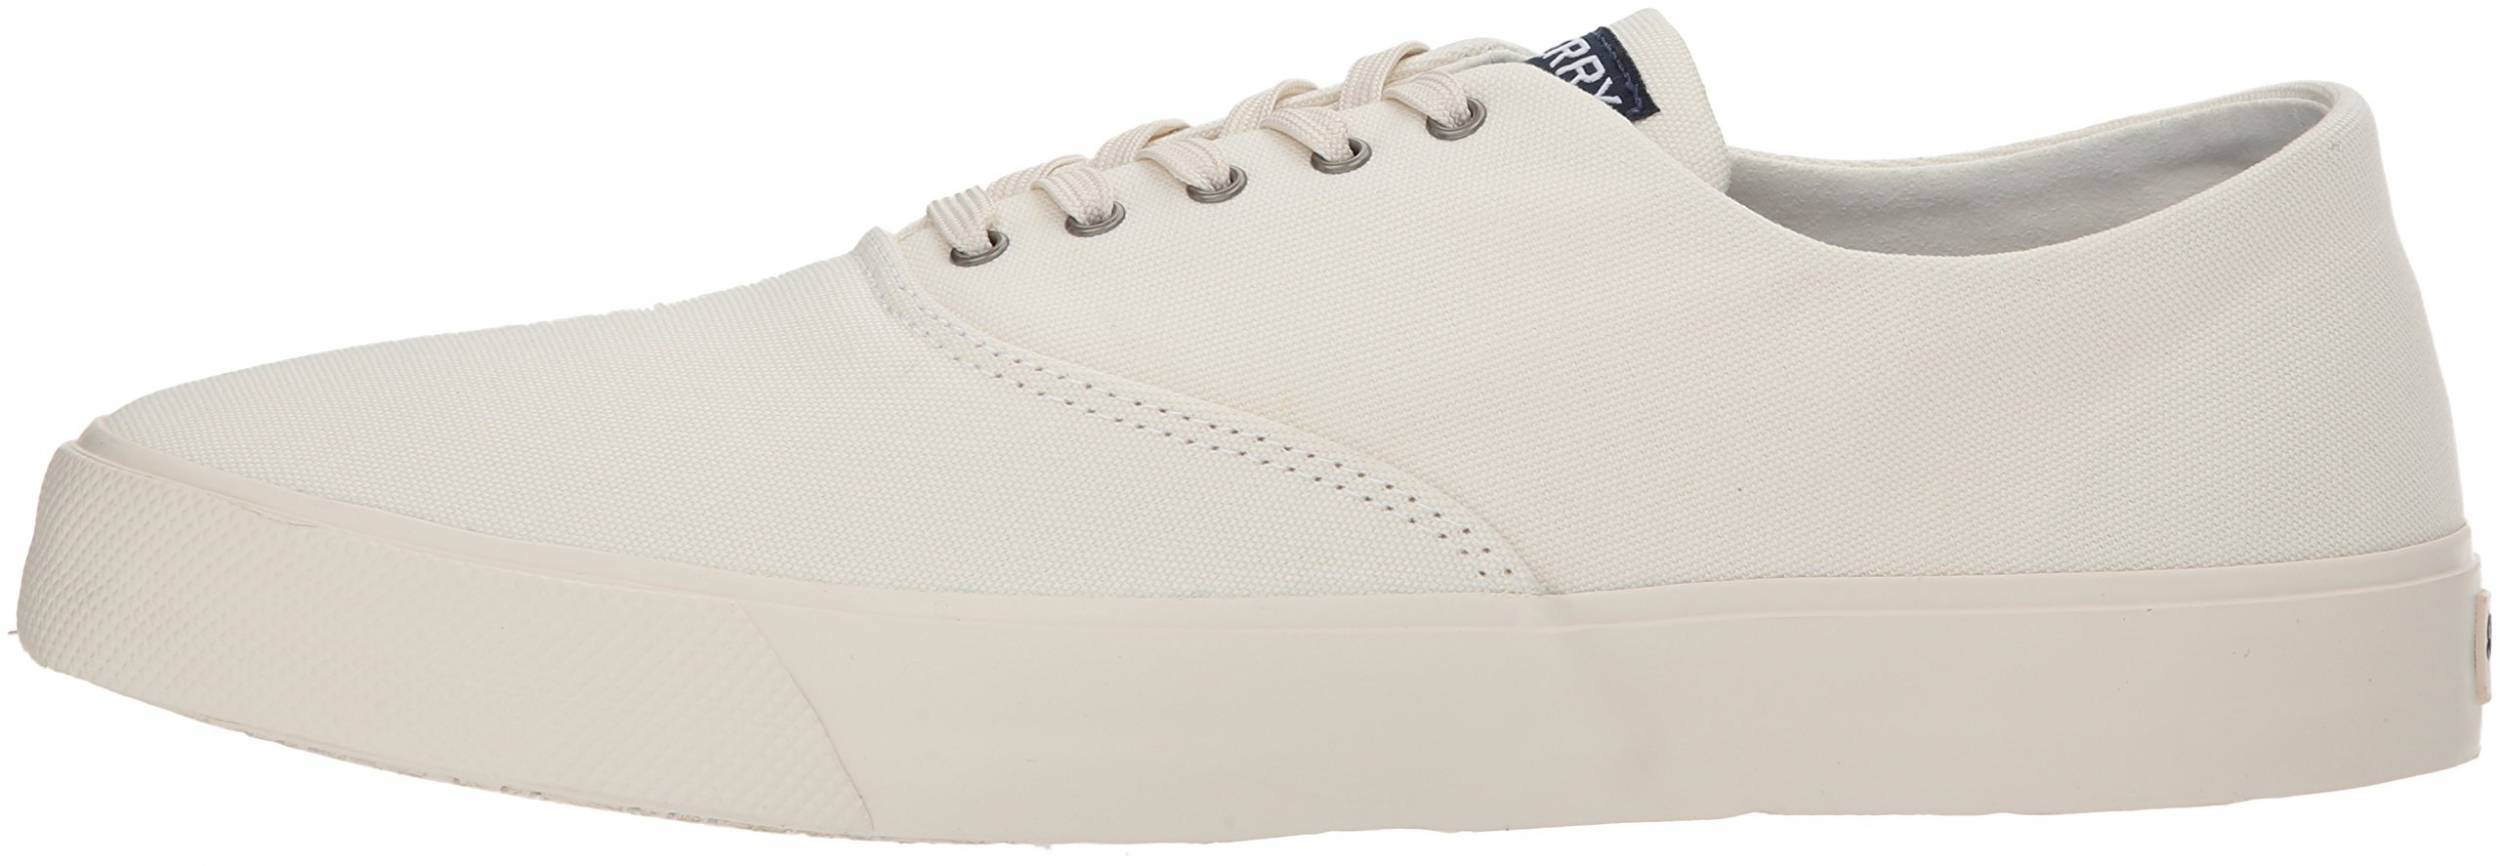 Sperry Cvo Top Sellers, 55% OFF | www.ilpungolo.org